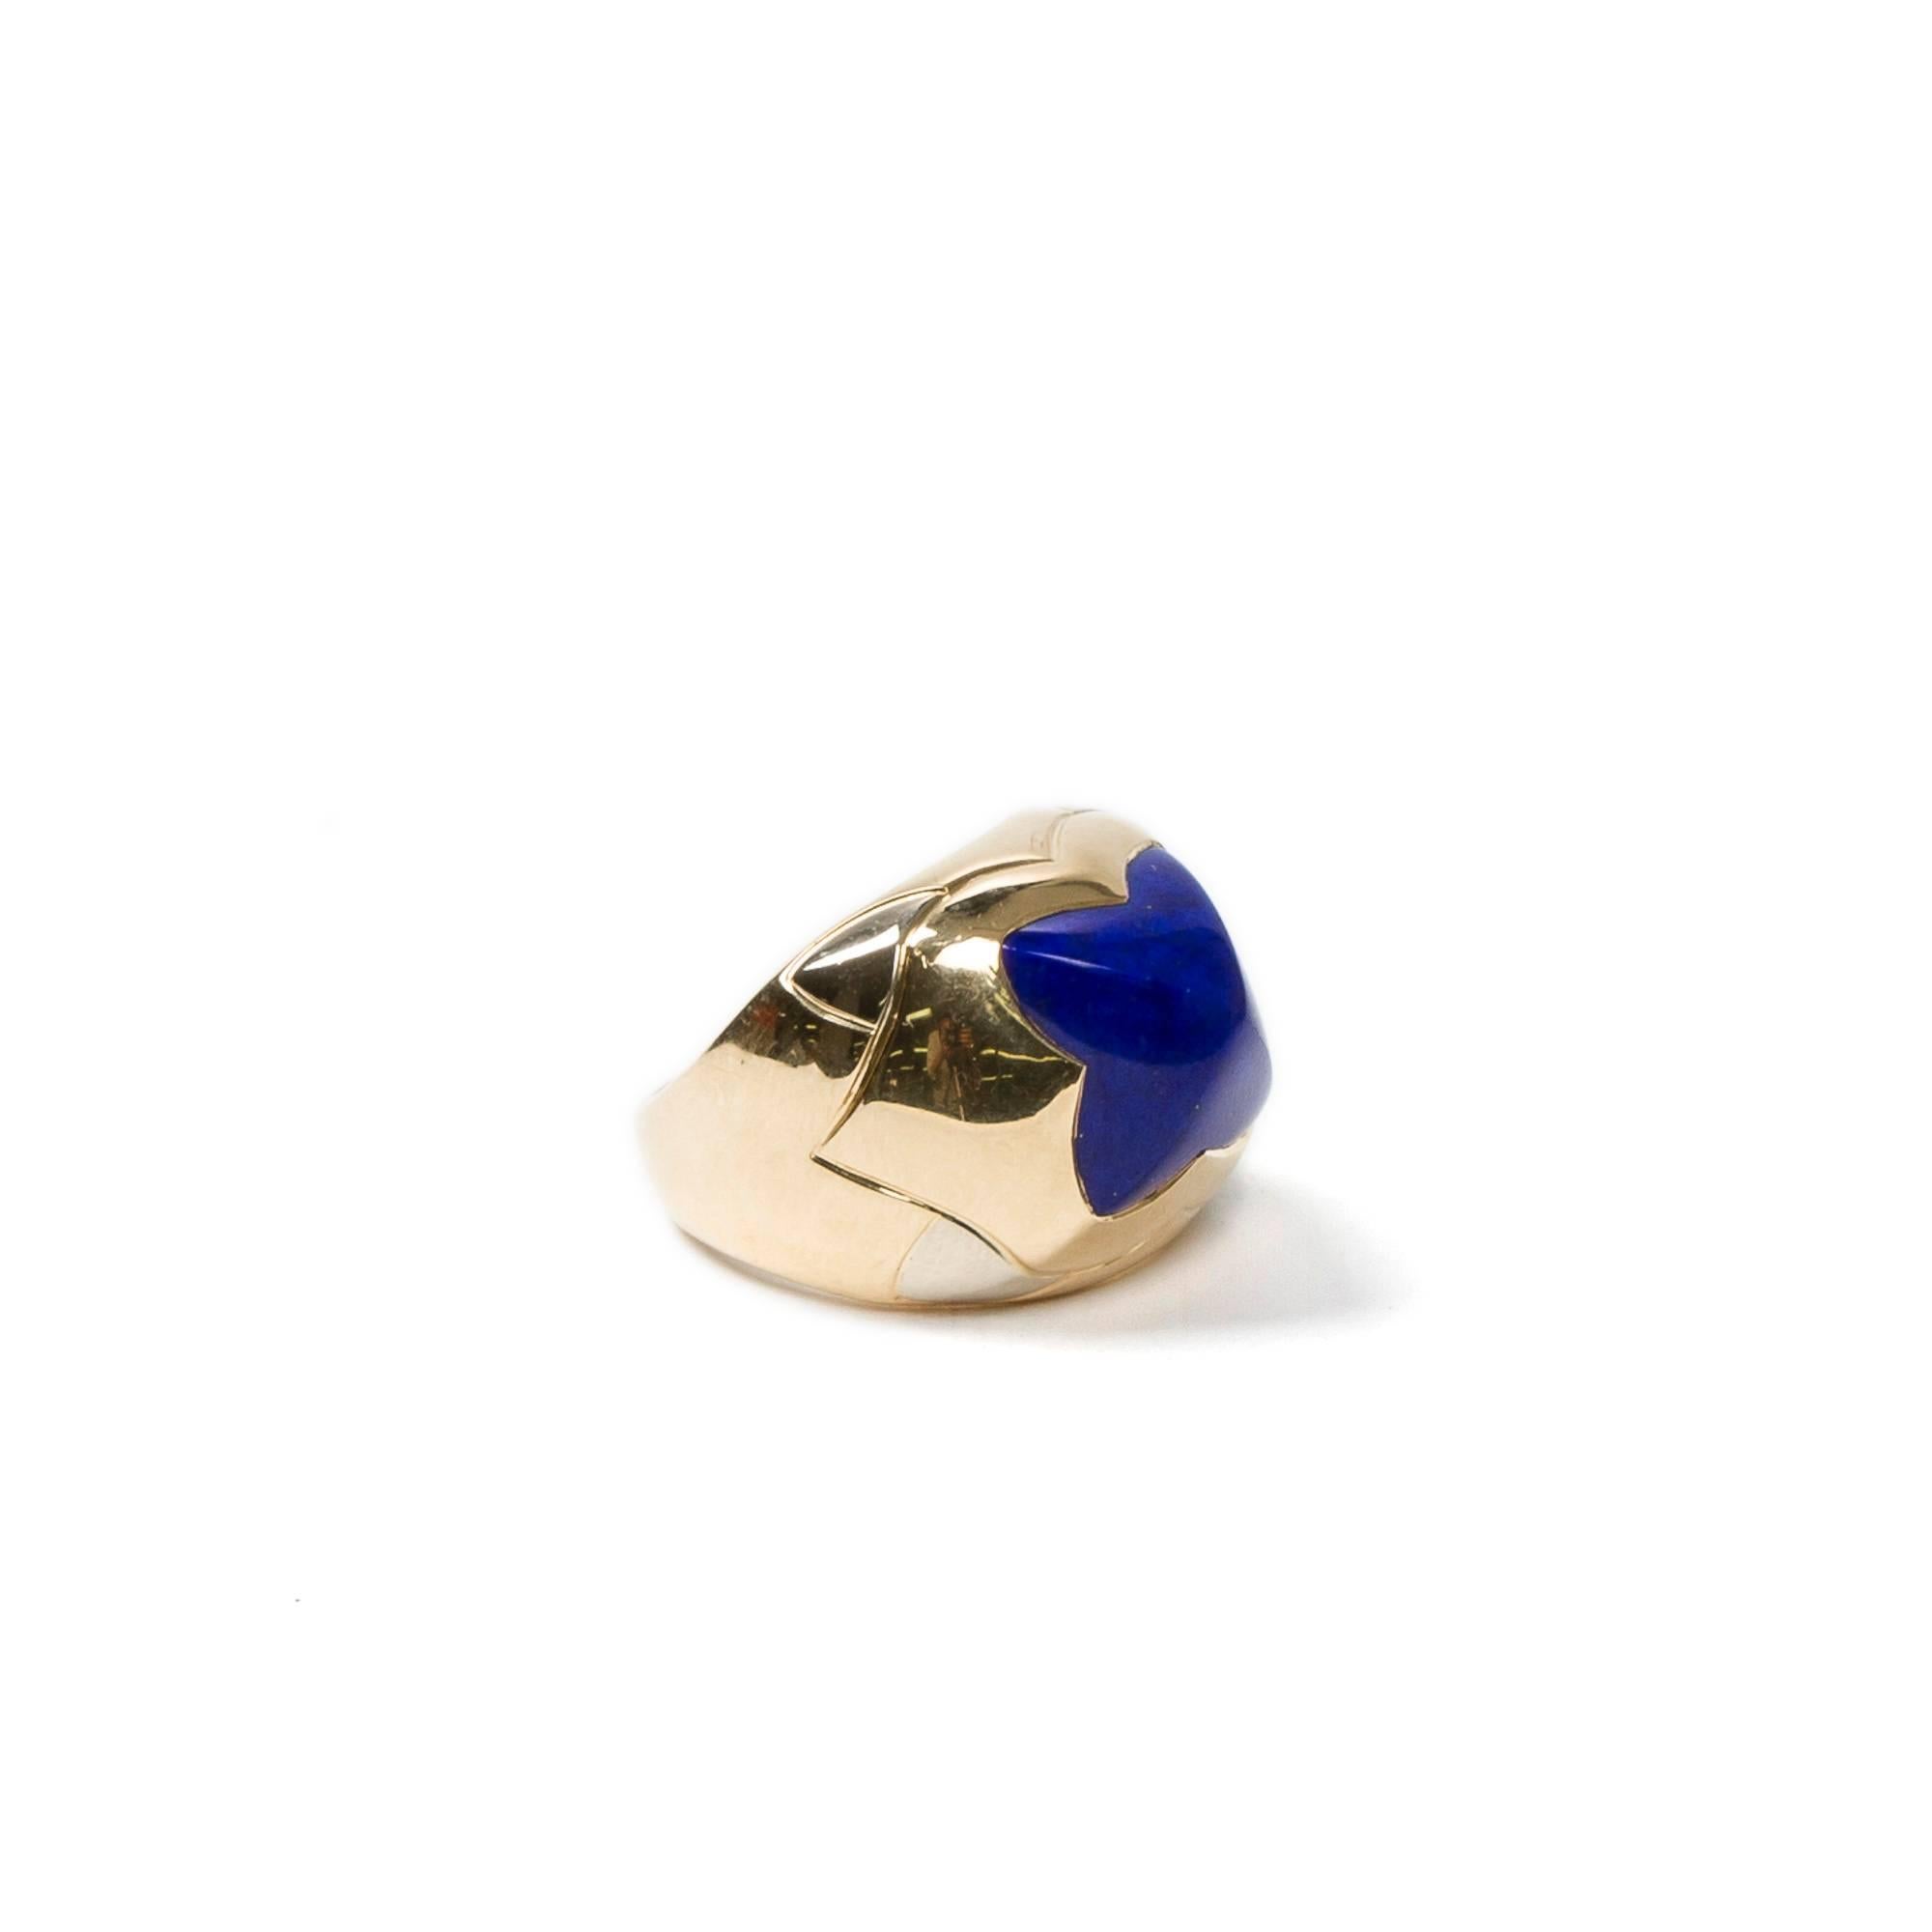 Pyramid ring in 750 yellow gold with lapiz lazuli. Hallmarks inside the ring 